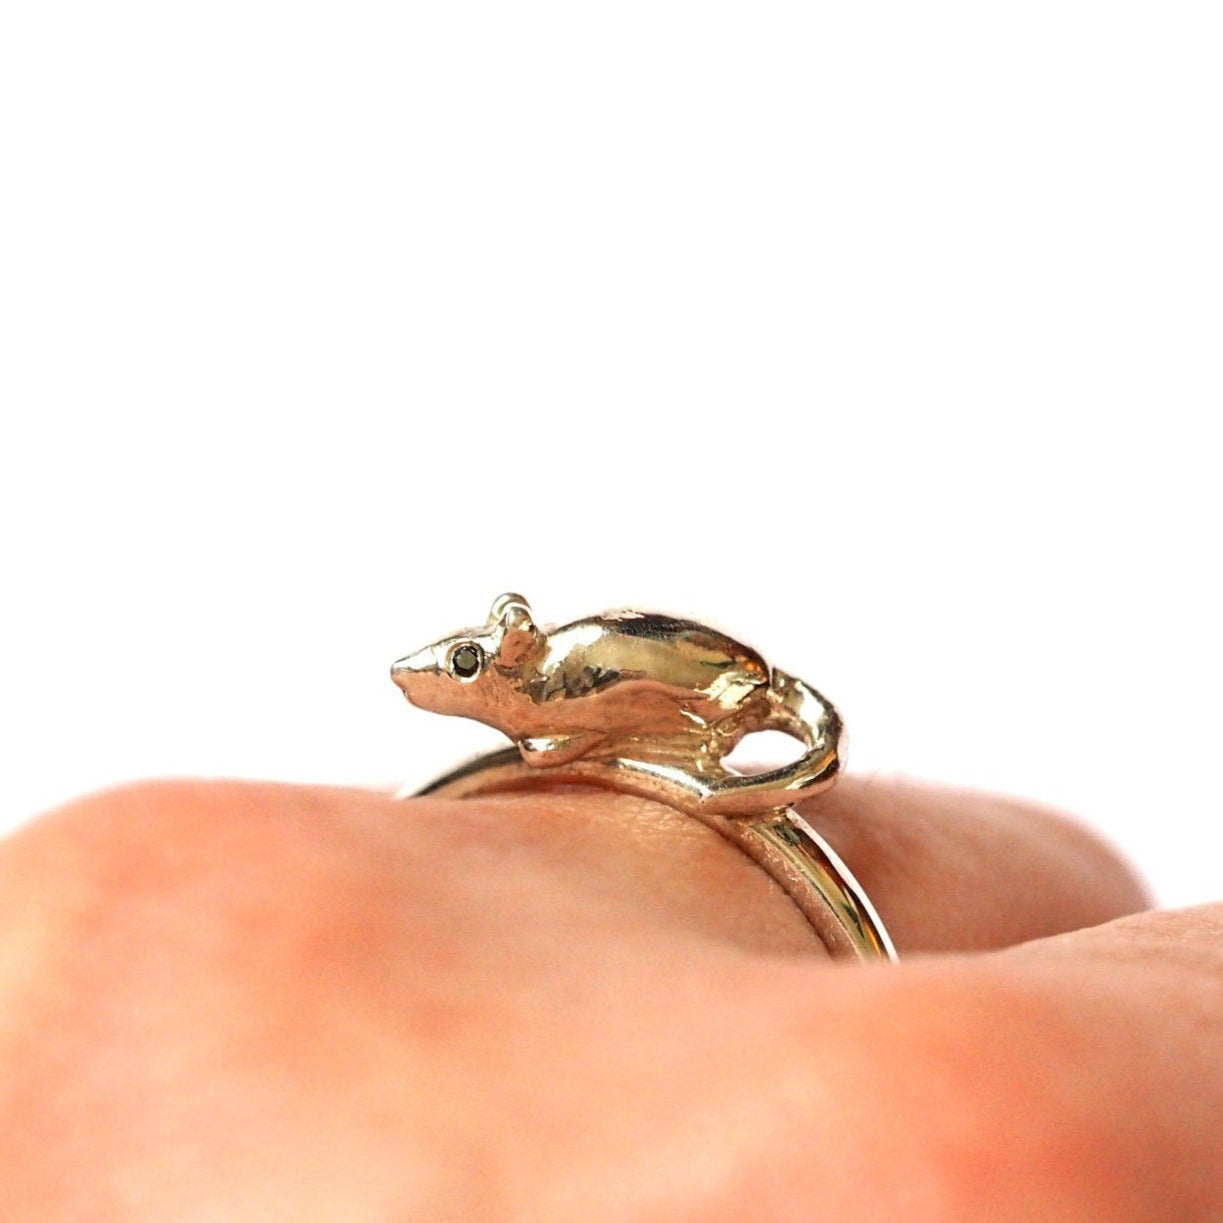 Mouse Ring - Recycled Sterling Silver